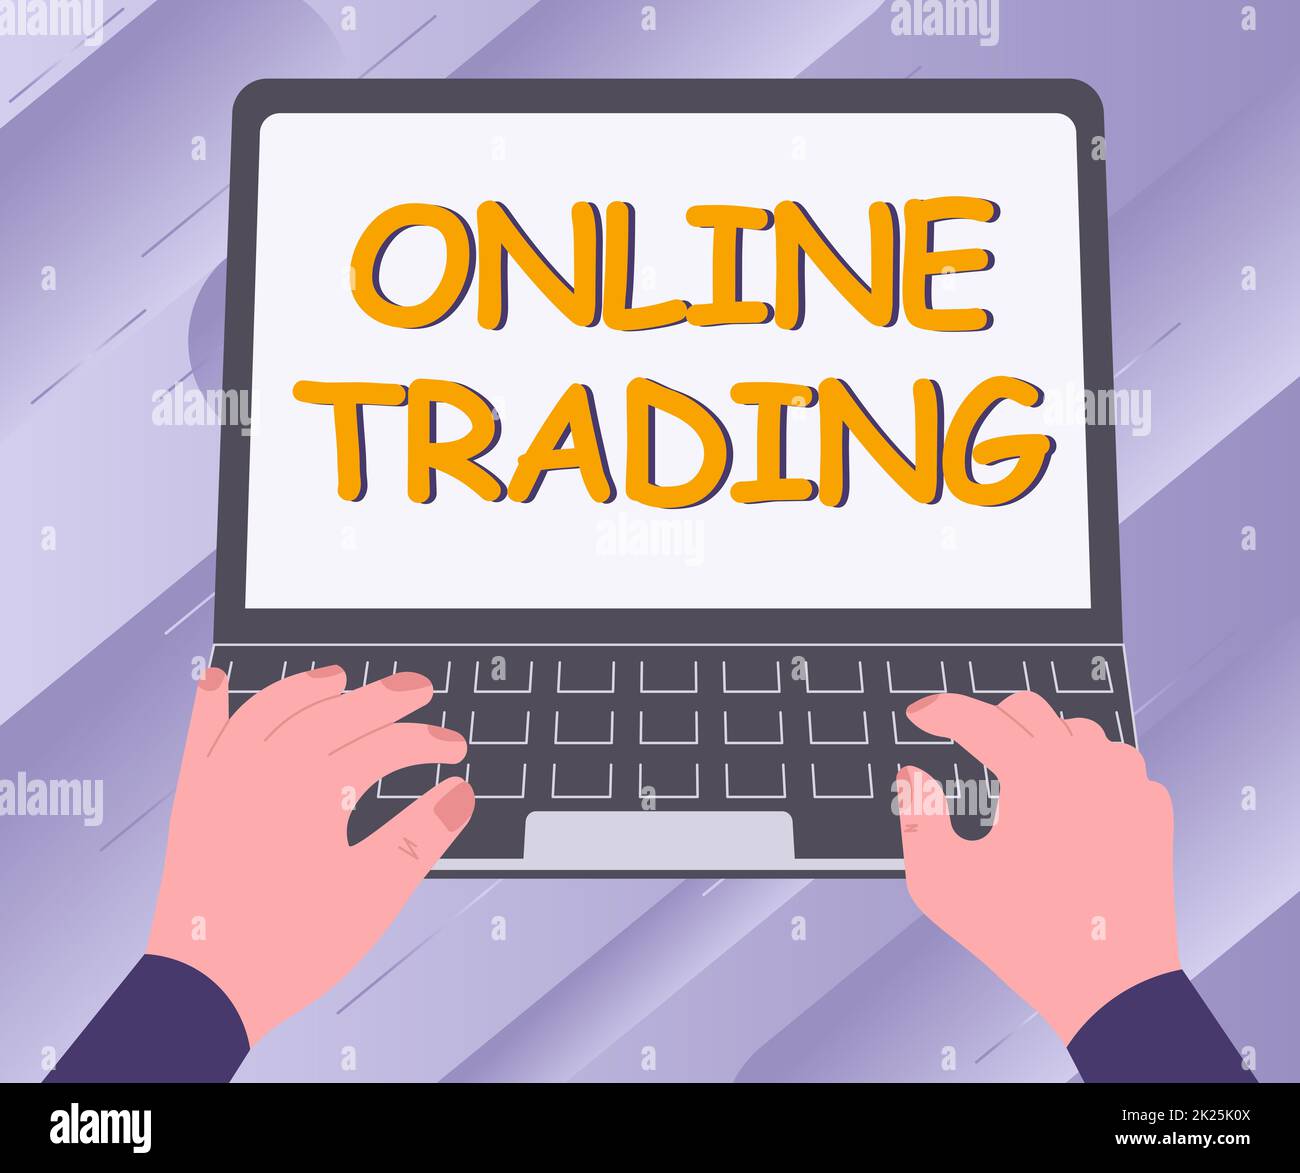 Text sign showing Online Trading. Business idea Buying and selling assets via a brokerage internet platform Illustration Of A Busy Hand Working On Laptop Searching For Ideas. Stock Photo